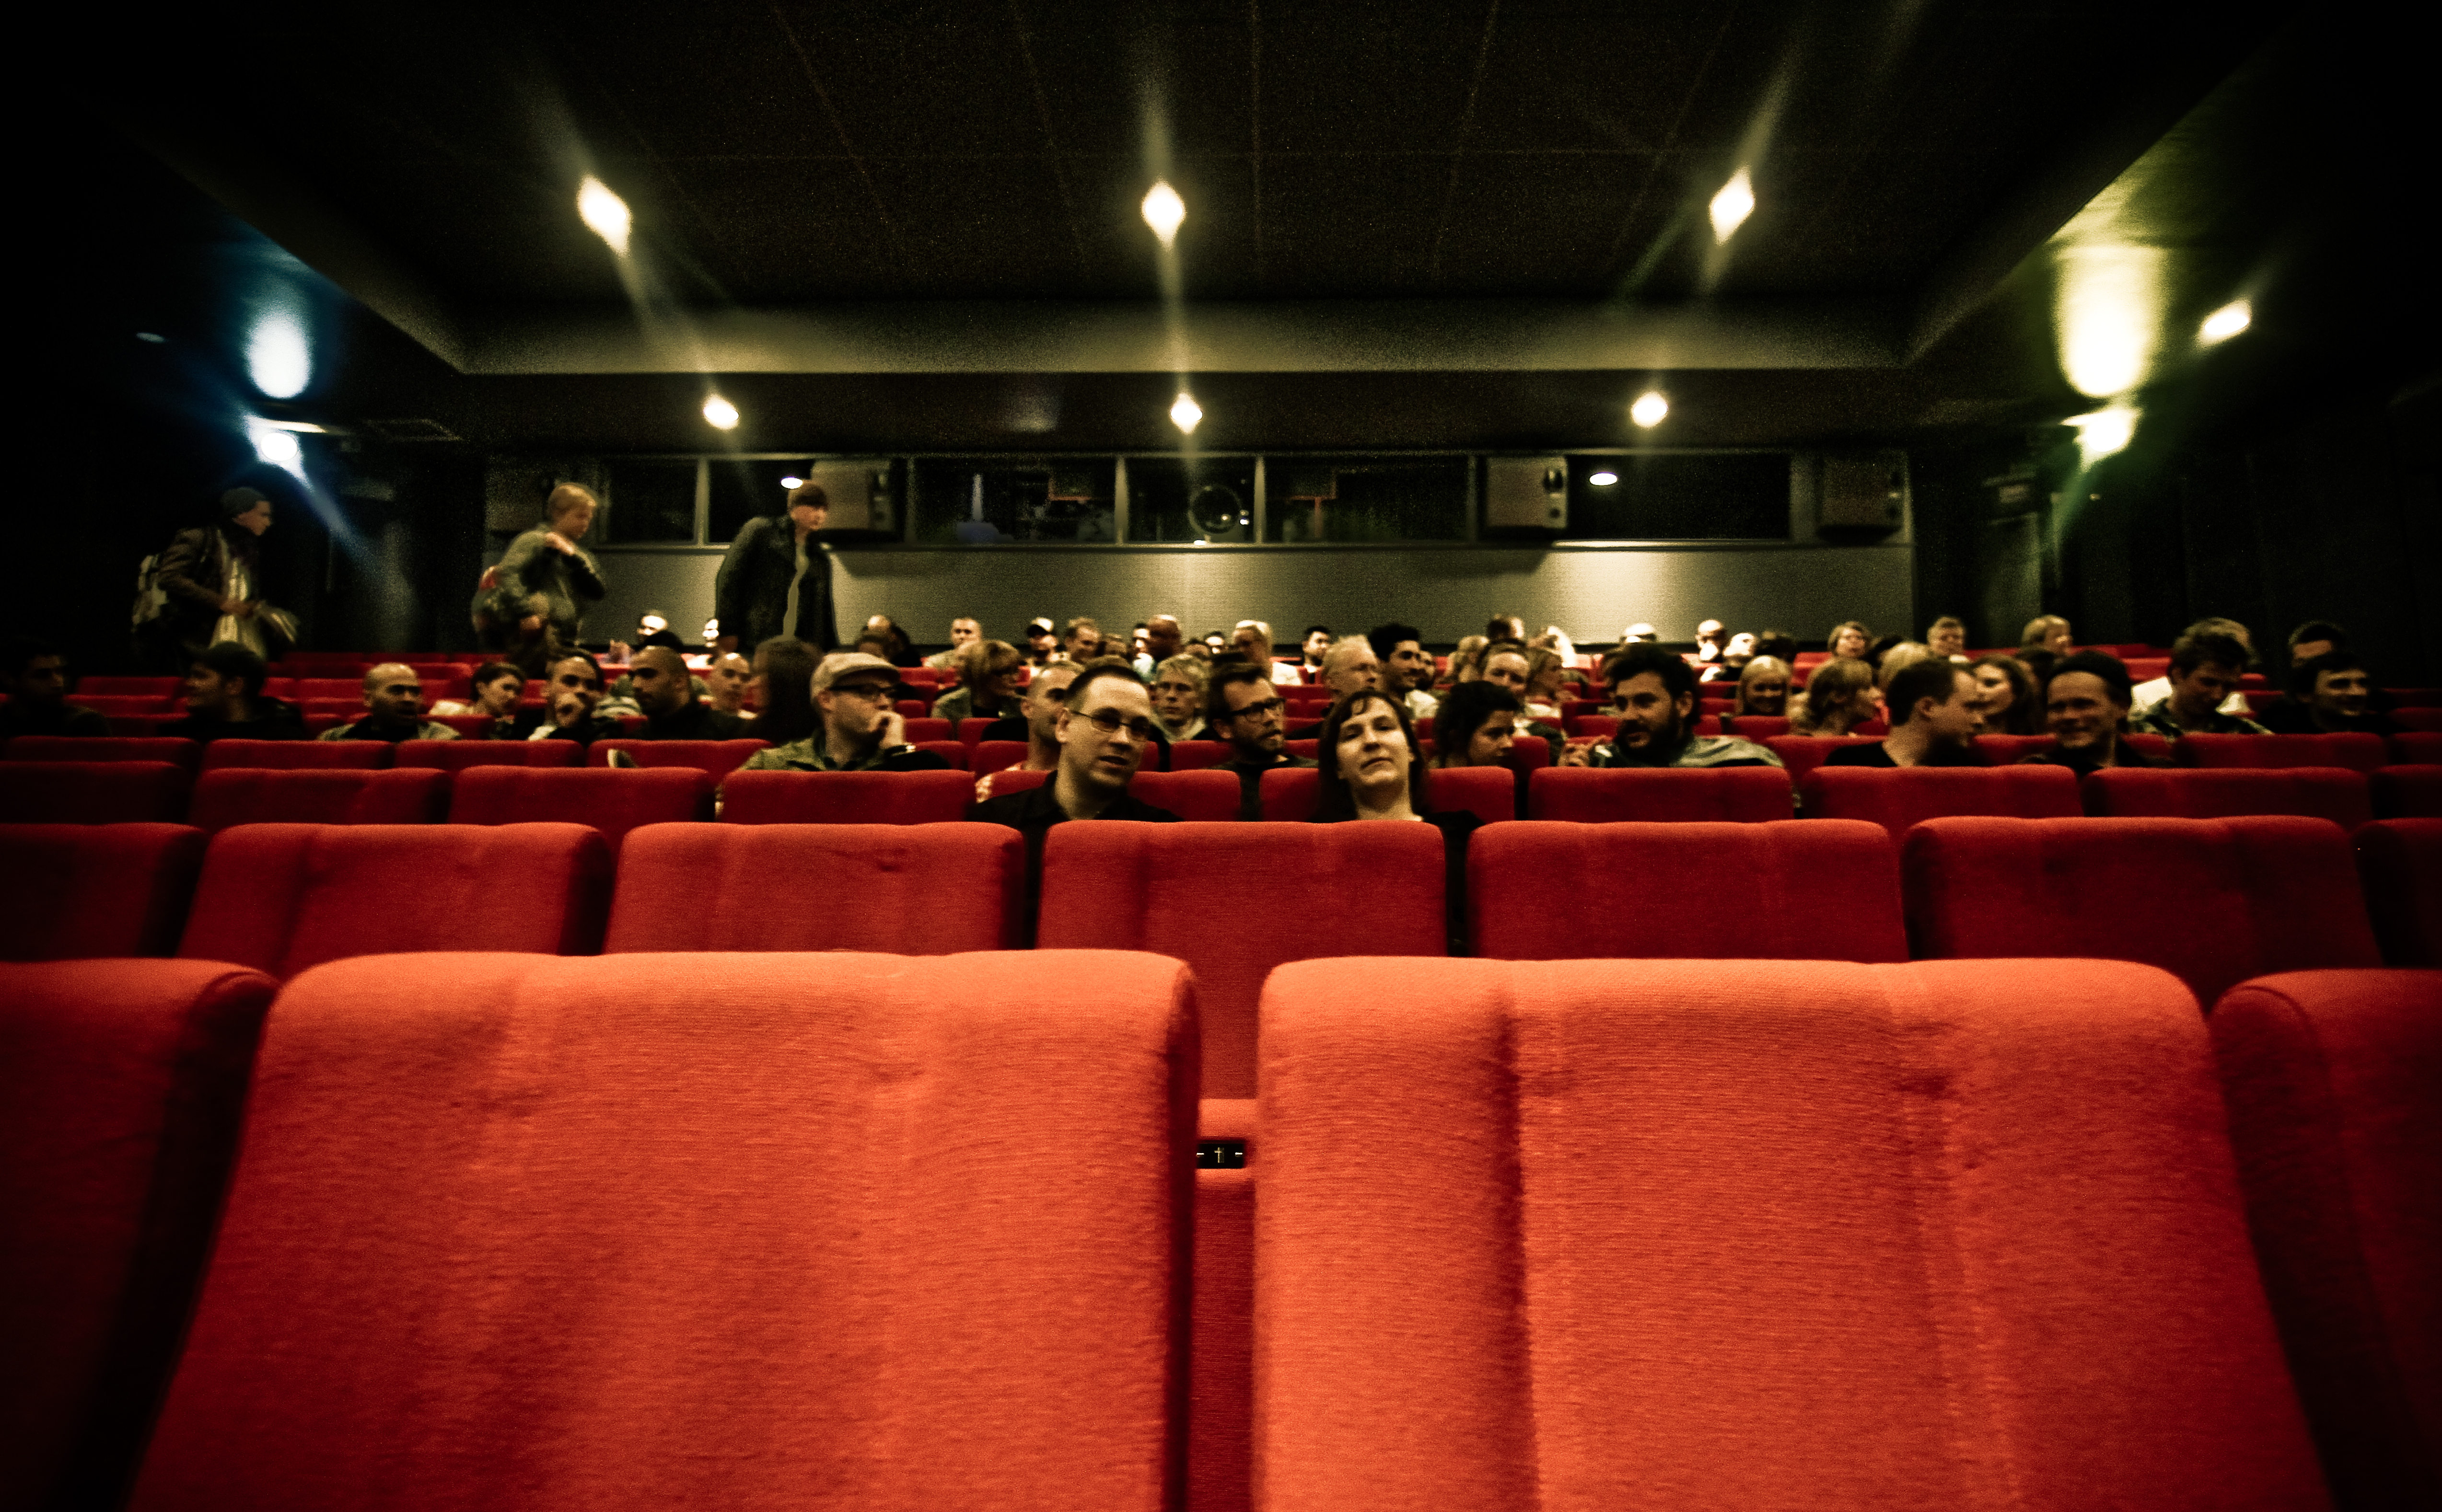 NO EXIT Part 1 (the official screening at CINEMATEKET, Copenhagen - people finding their seats).